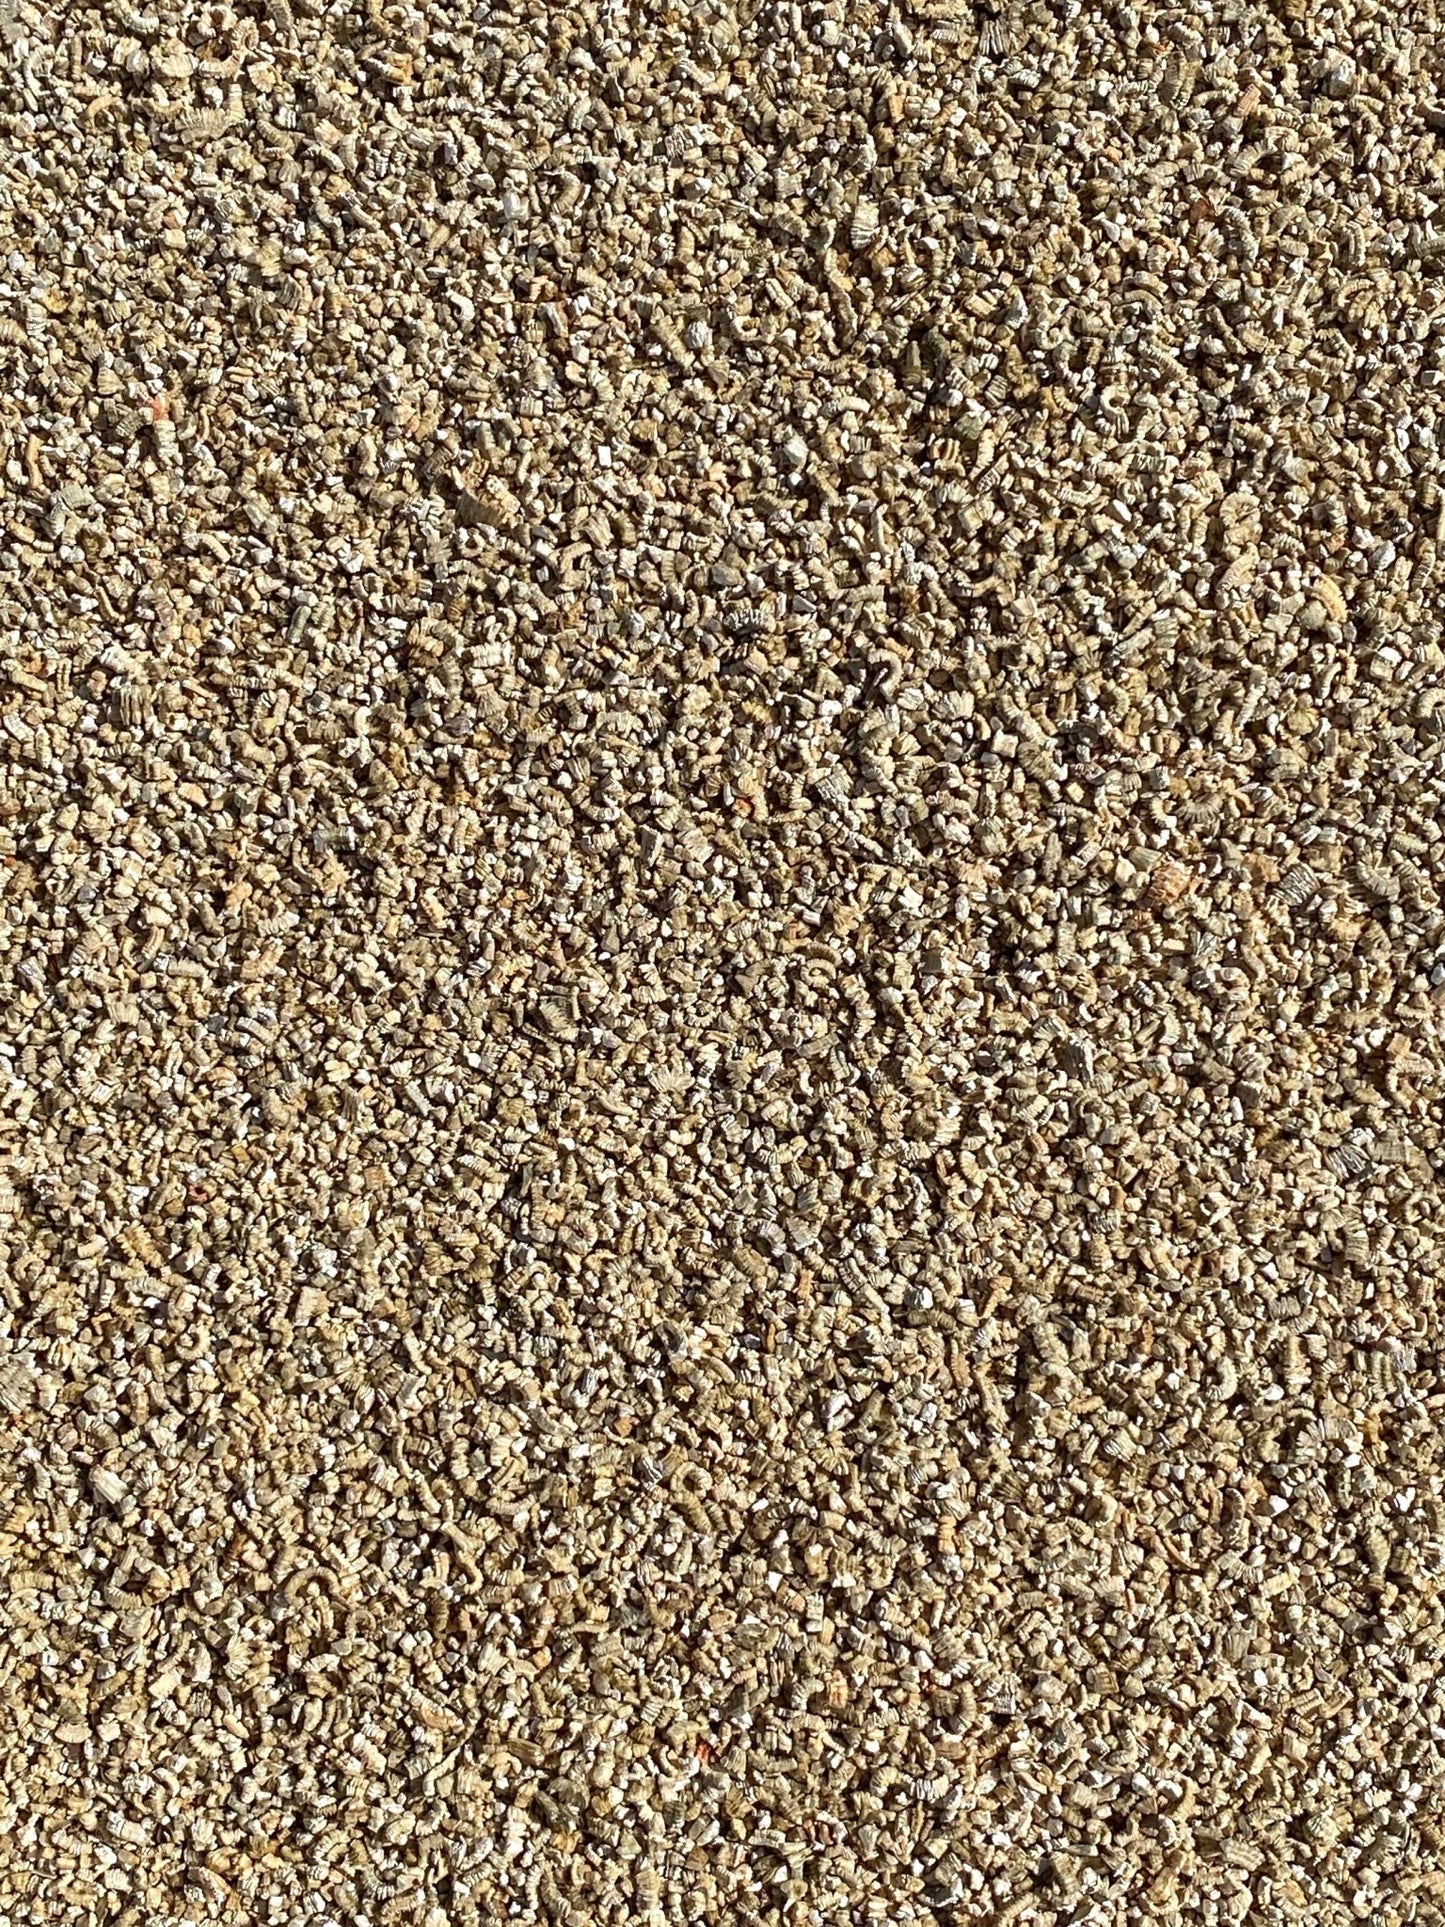 Vermiculite A1 Super Fine - Pacific SubstratesPacific Substrates